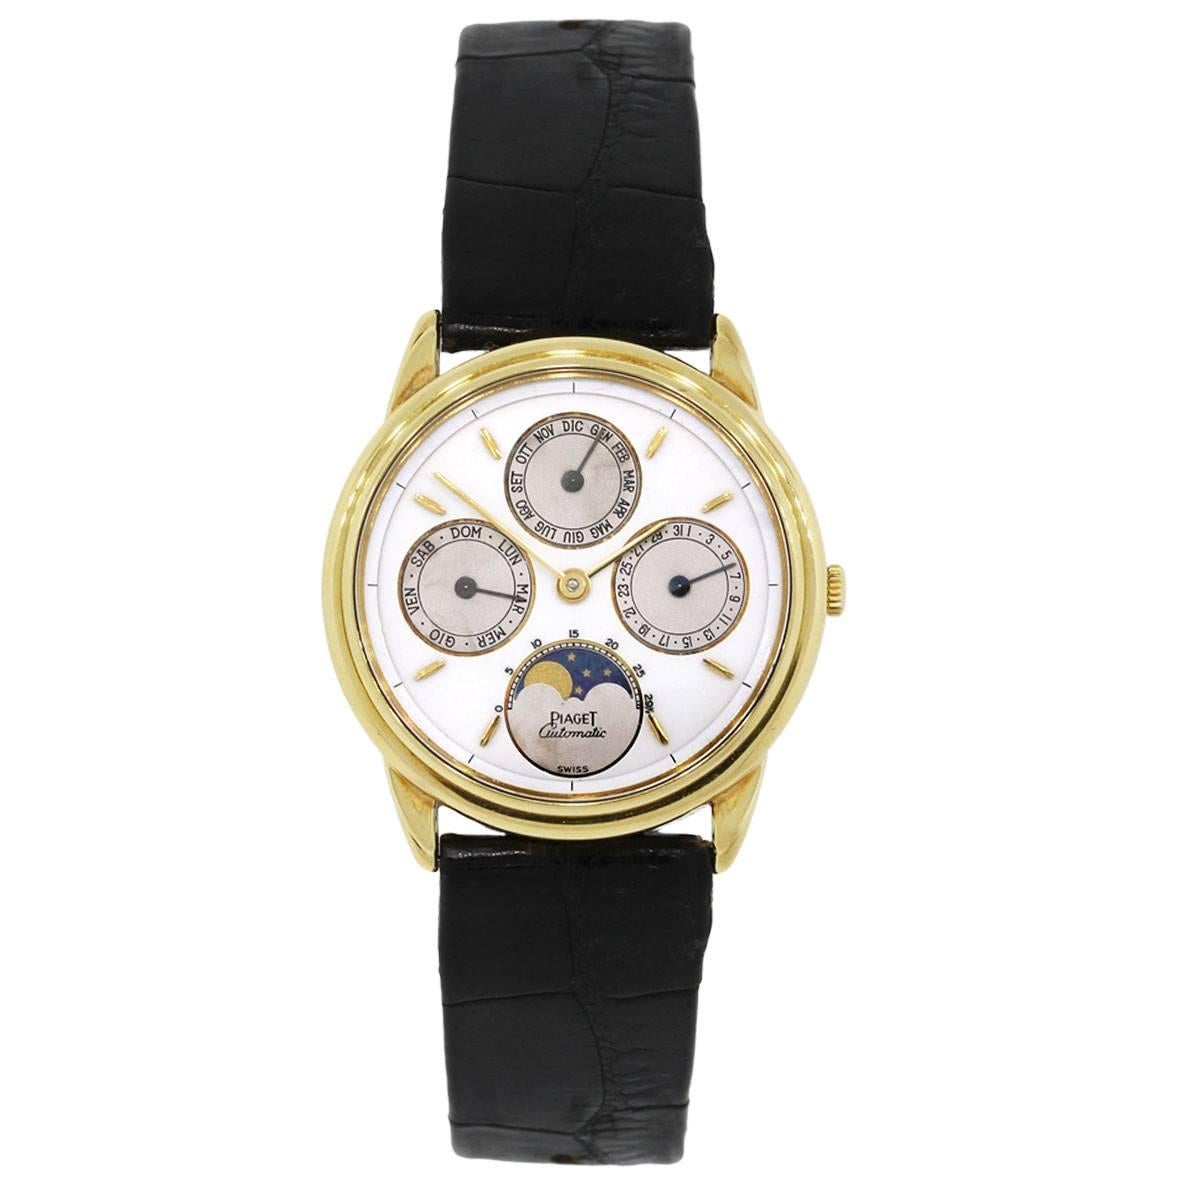 Brand: Piaget
MPN: 15958
Model: Annual Calendar
Case Material: 18k yellow gold
Case Diameter: 33mm
Crystal: Crystal sapphire
Bezel: Smooth 18k yellow gold bezel
Dial: White enamel chronograph dial with annual calendar and moonphase
Bracelet: Black